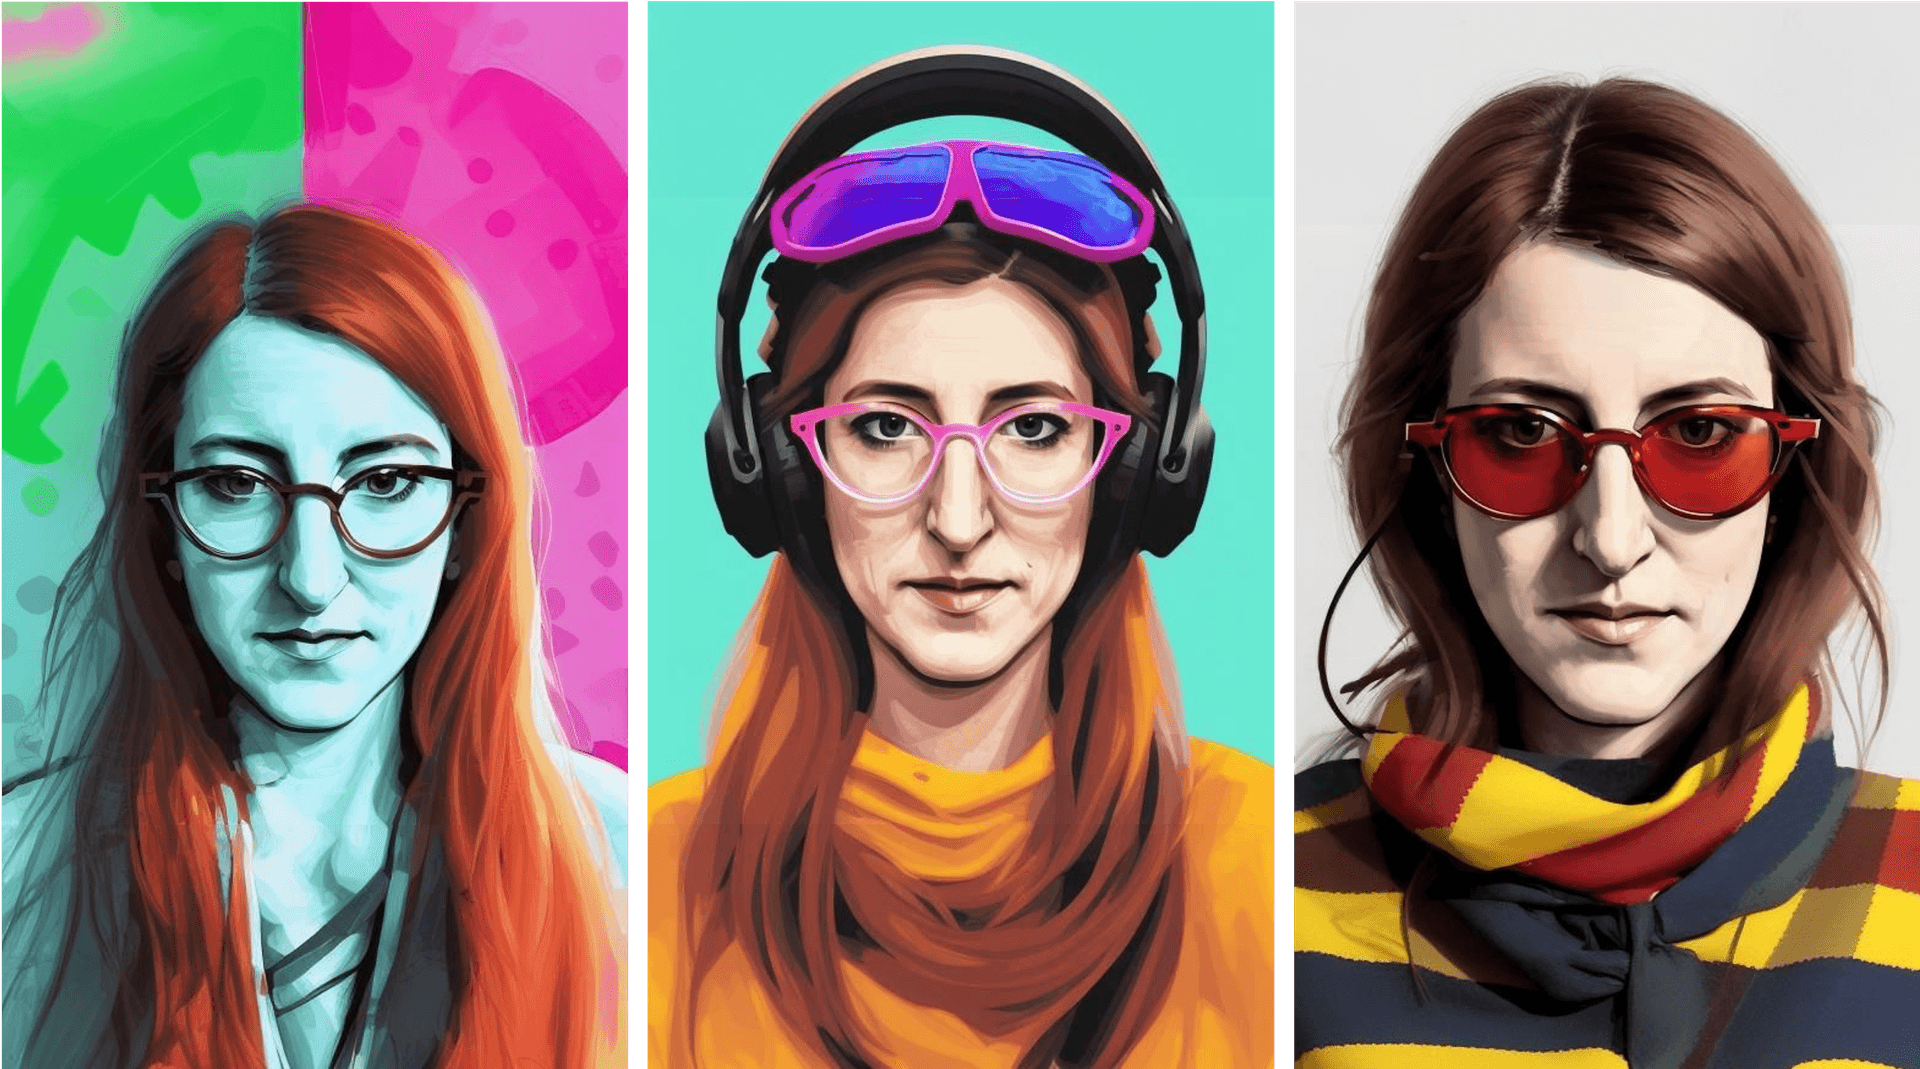 Images created by Retrato of Sarah Schlobohm, a physicist turned data scientist